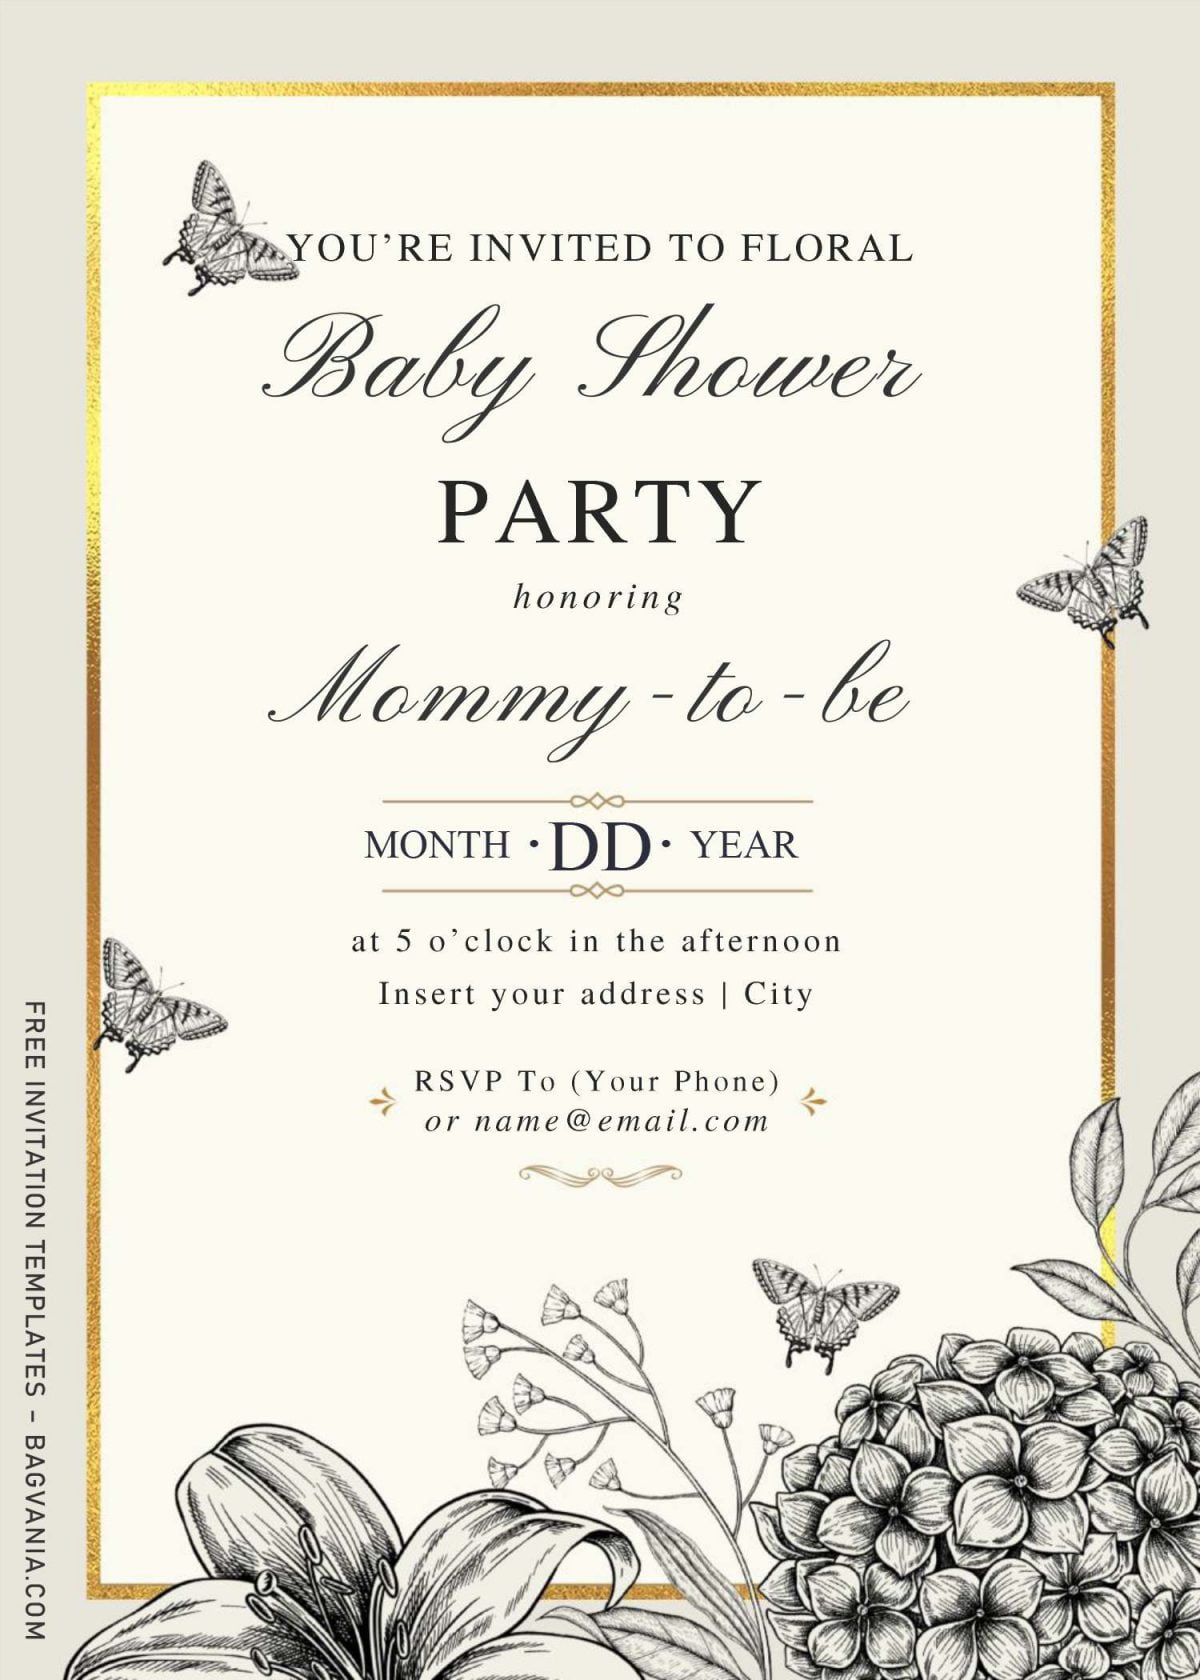 Free Hand Drawn Vintage Floral Wedding Invitation Templates For Word and has portrait orientation card design